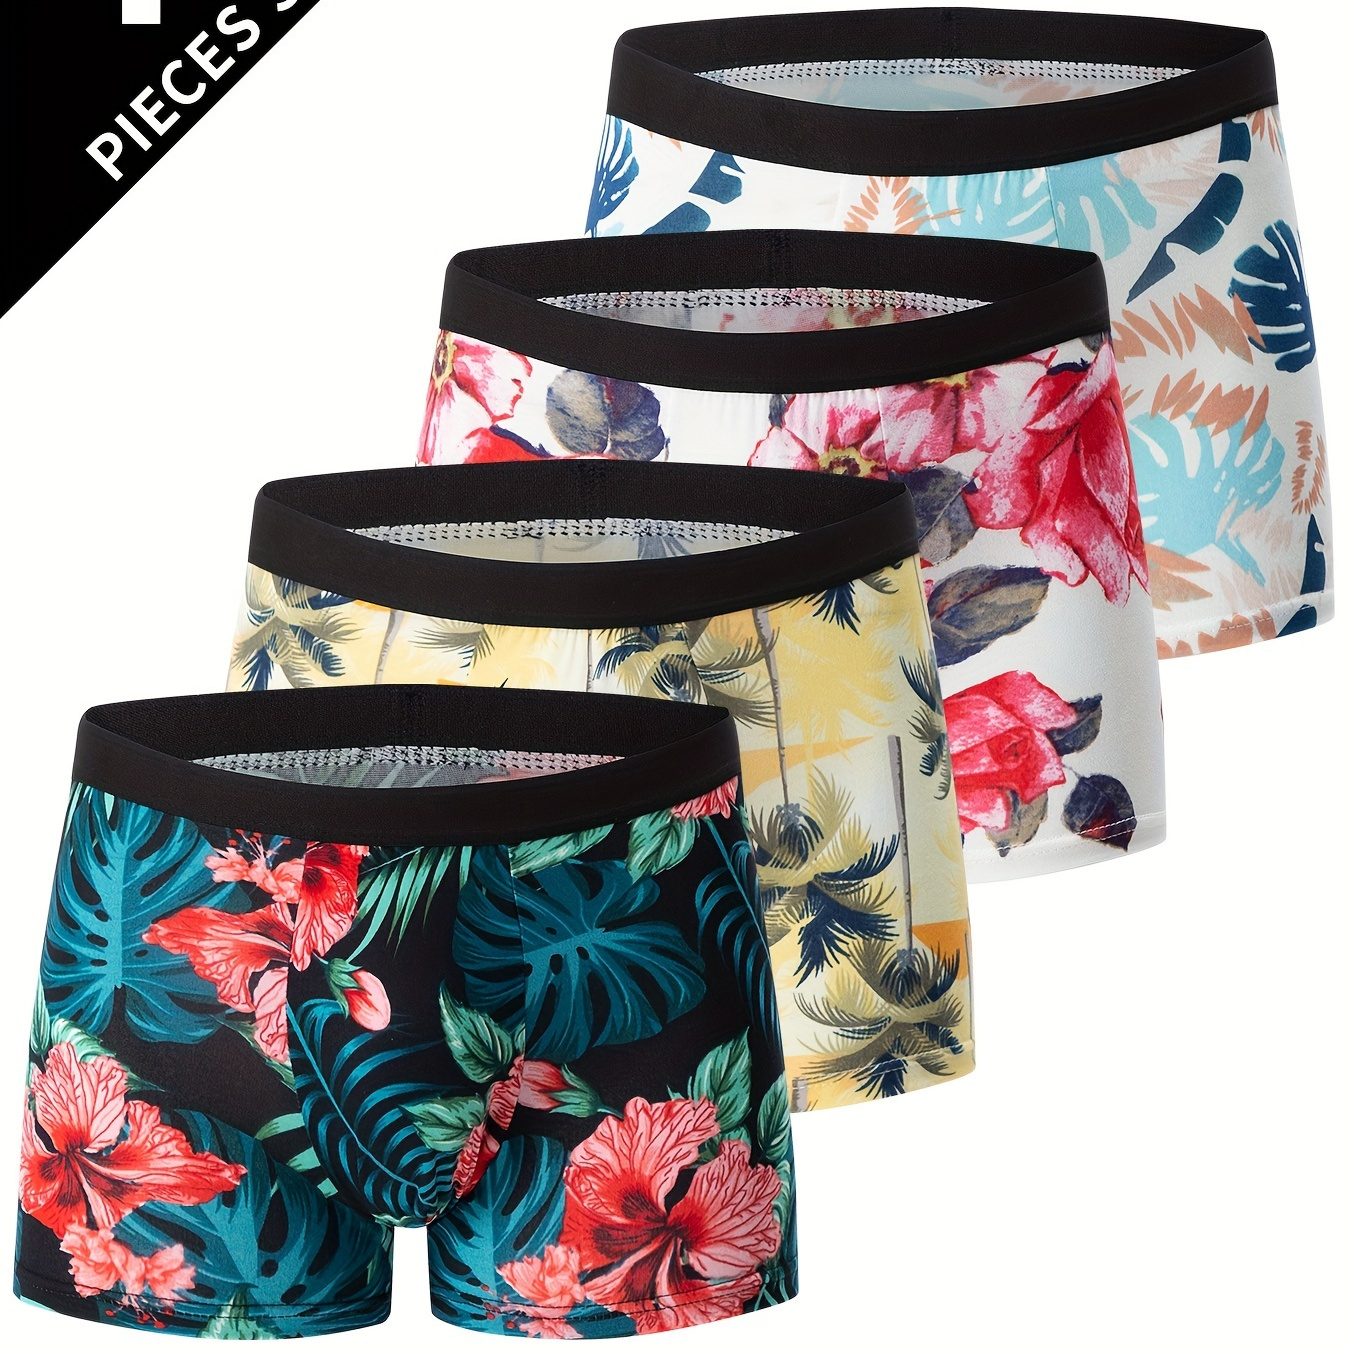 

4pcs Flower Pattern Men's Antibacterial Underwear, Casual Boxer Briefs Shorts, Breathable Comfy Stretchy Boxer Sports Shorts